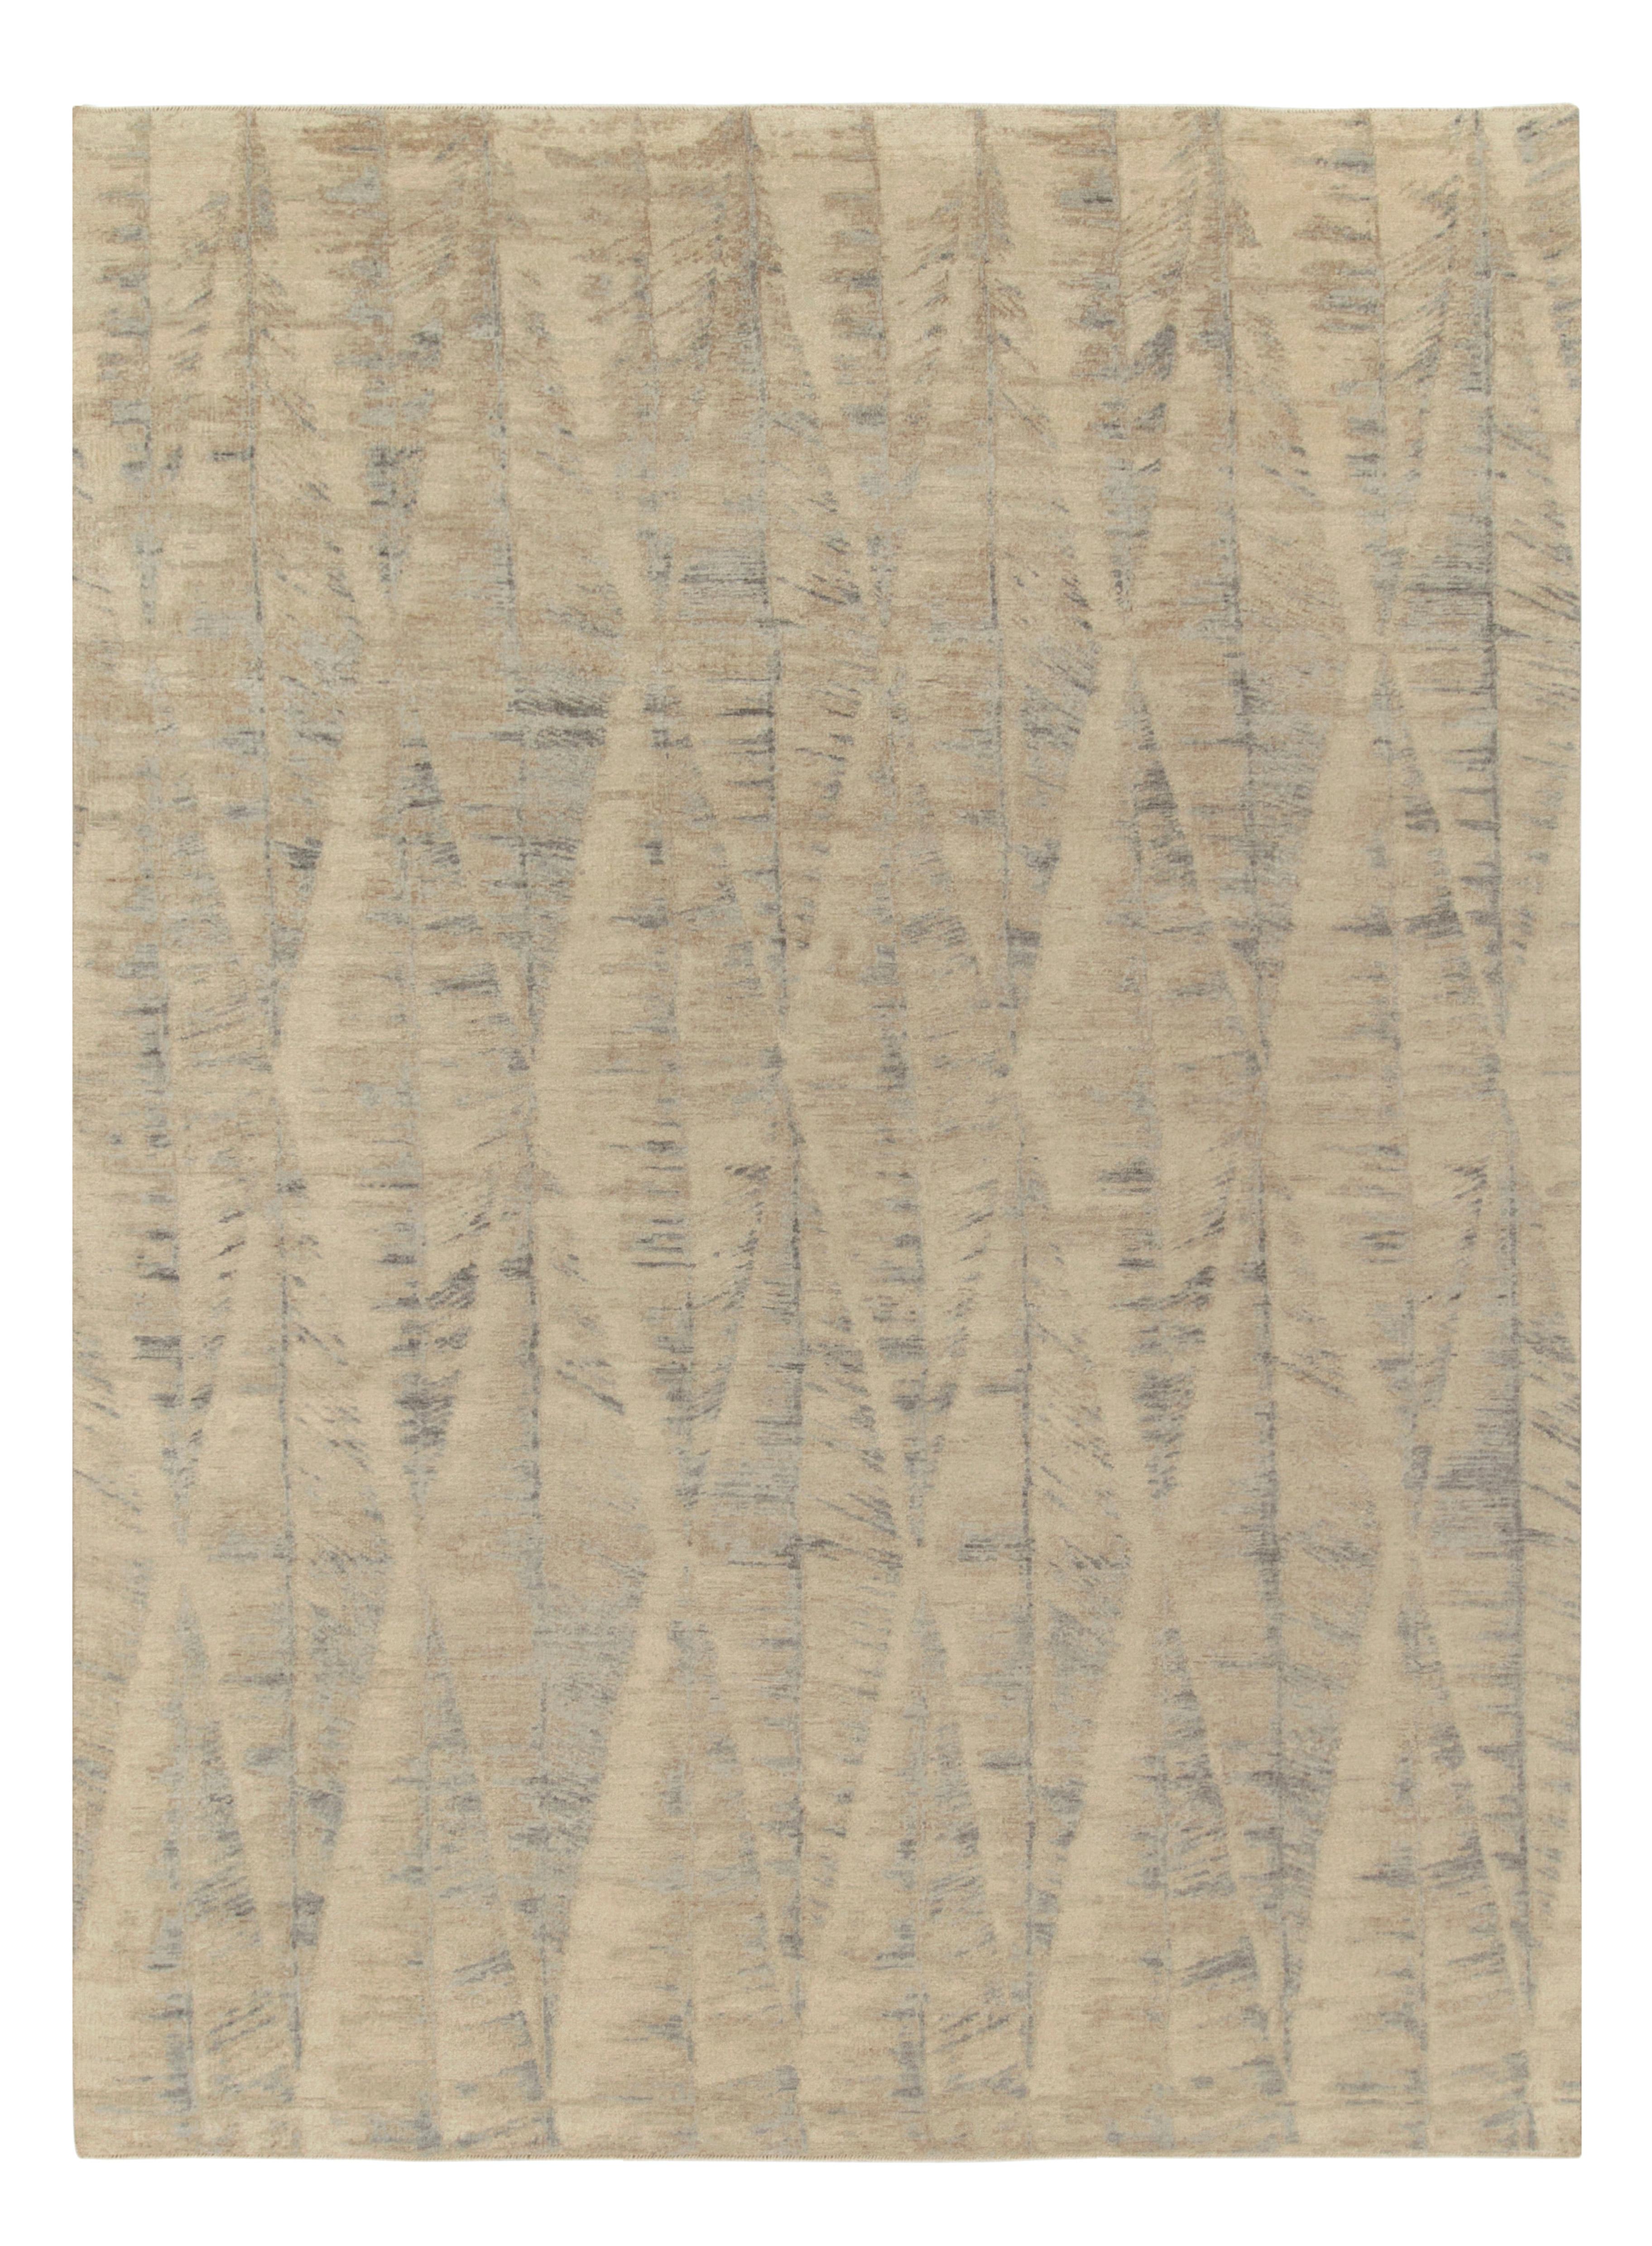 Hand-Knotted Abstract Rug in Beige, Blue-Gray Geometric Pattern by Rug & Kilim